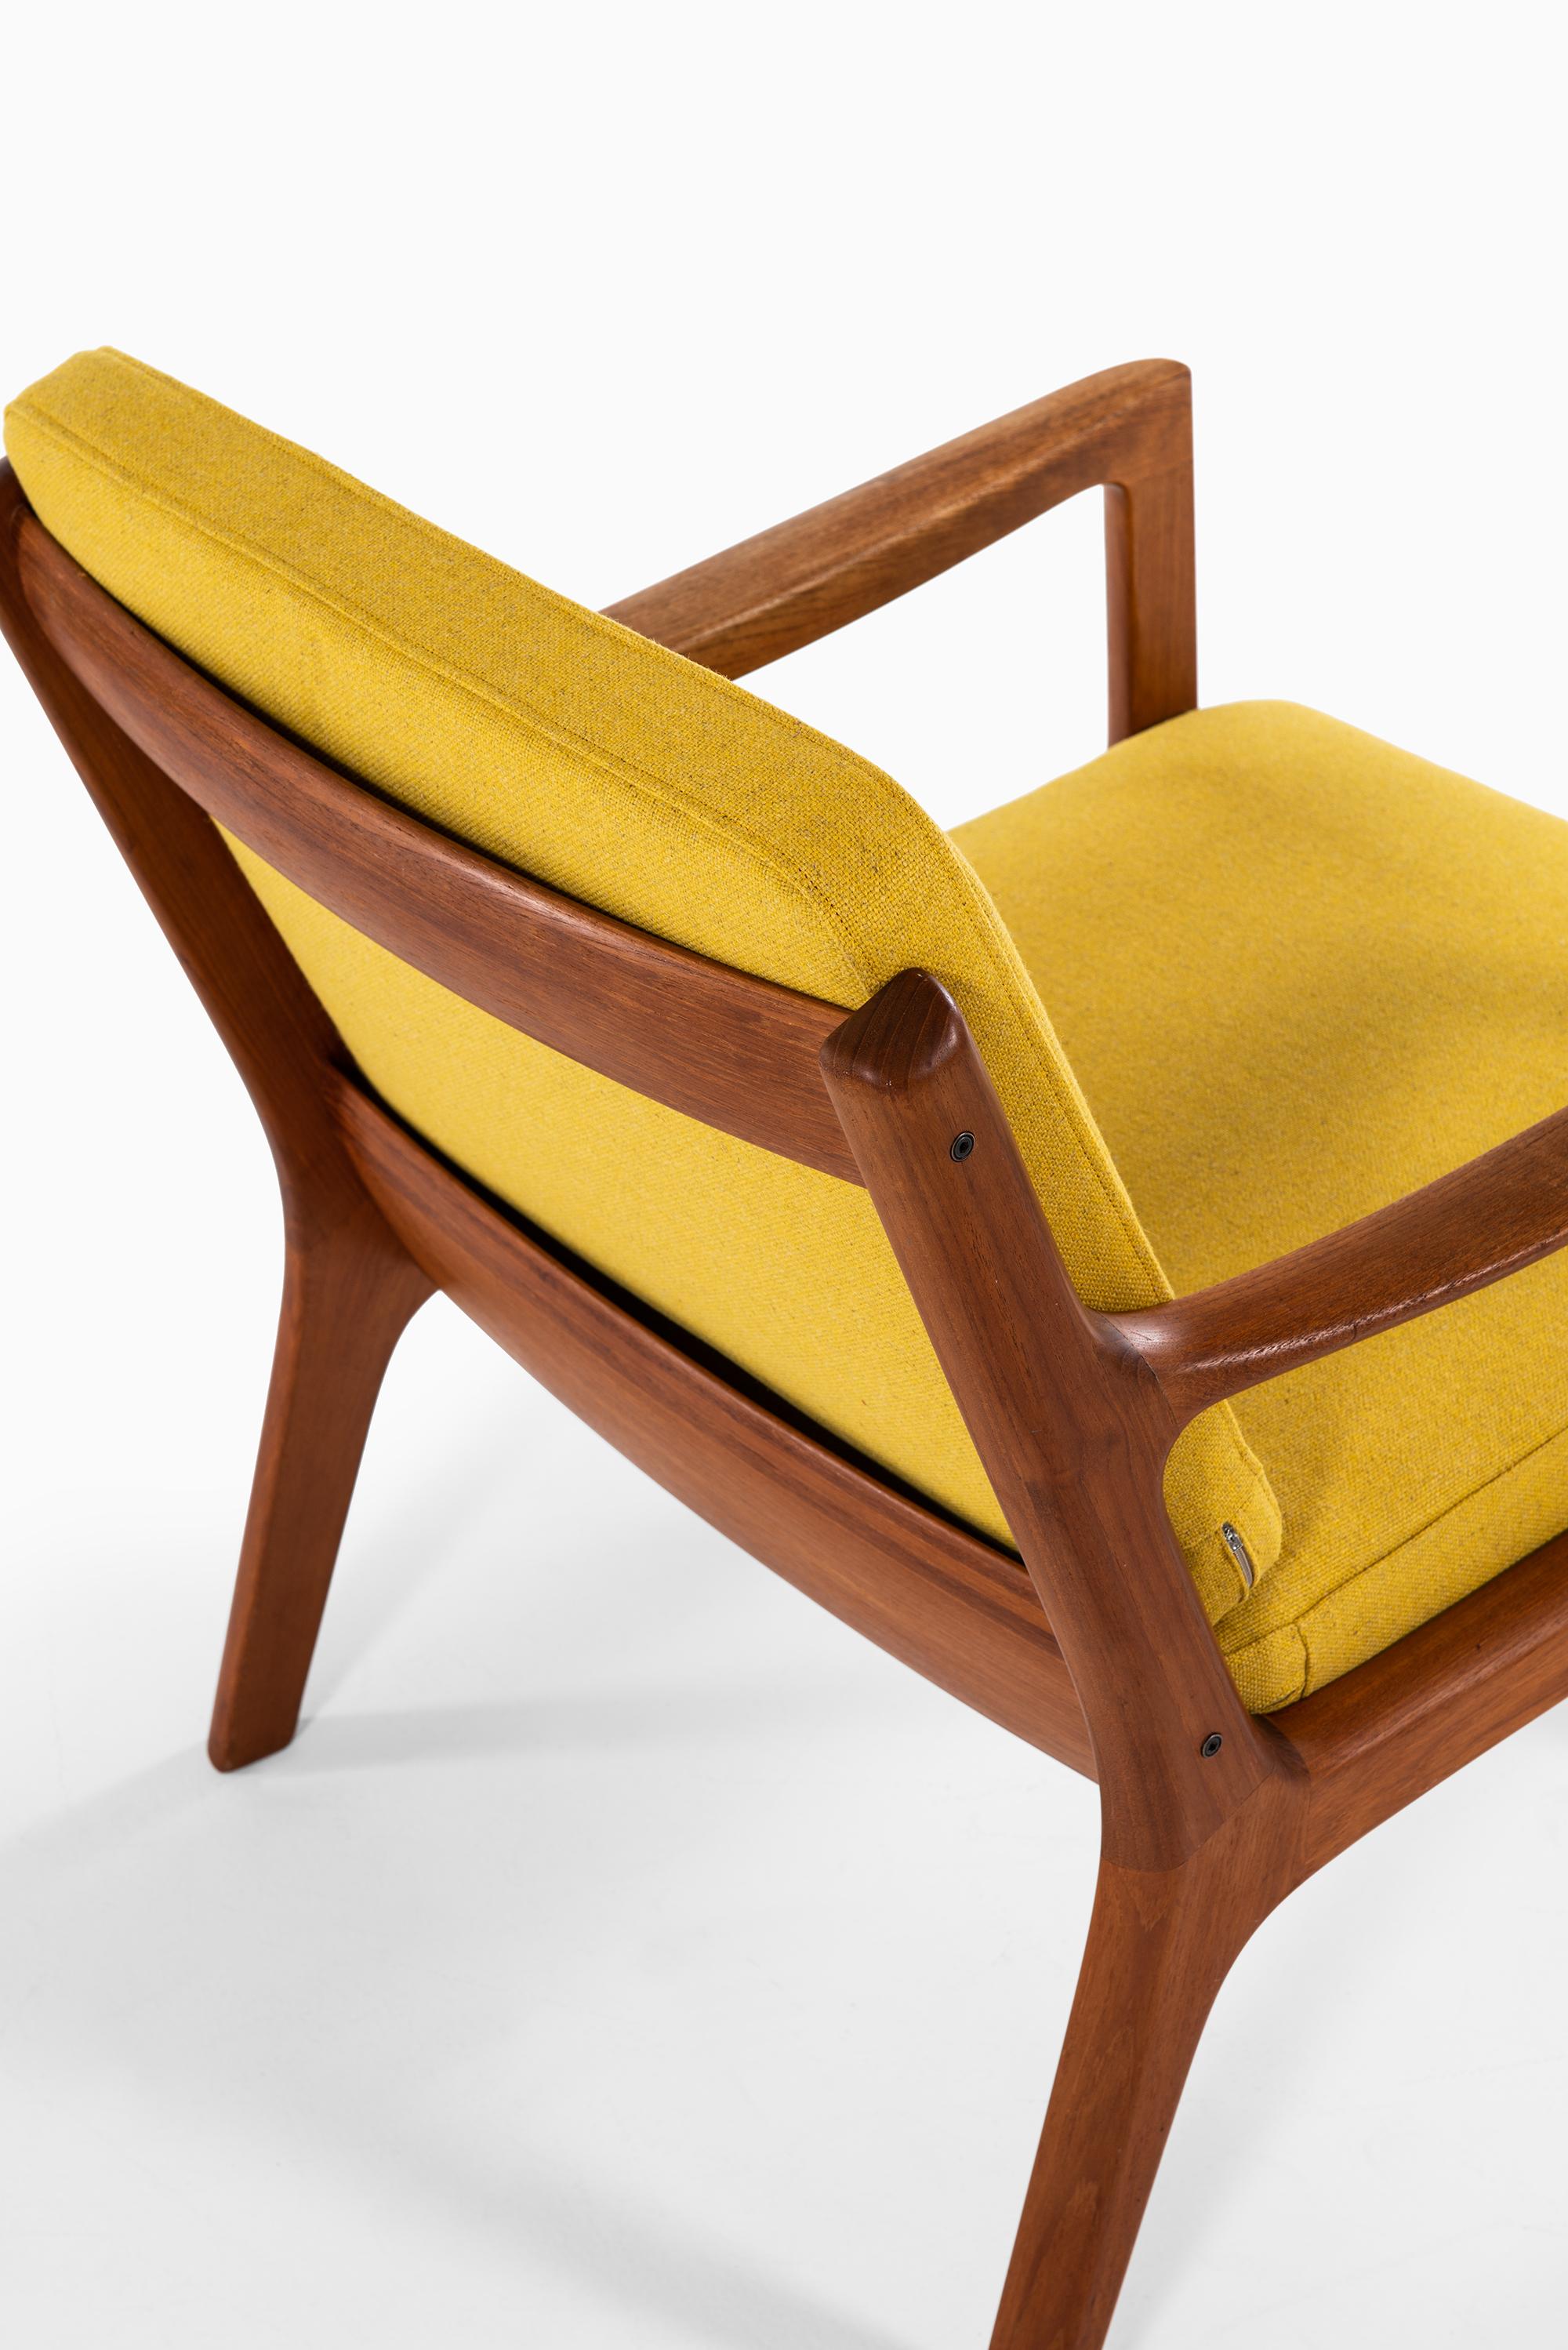 A pair of easy chairs model 116 / Senator designed by Ole Wanscher. Produced by France & Son in Denmark.